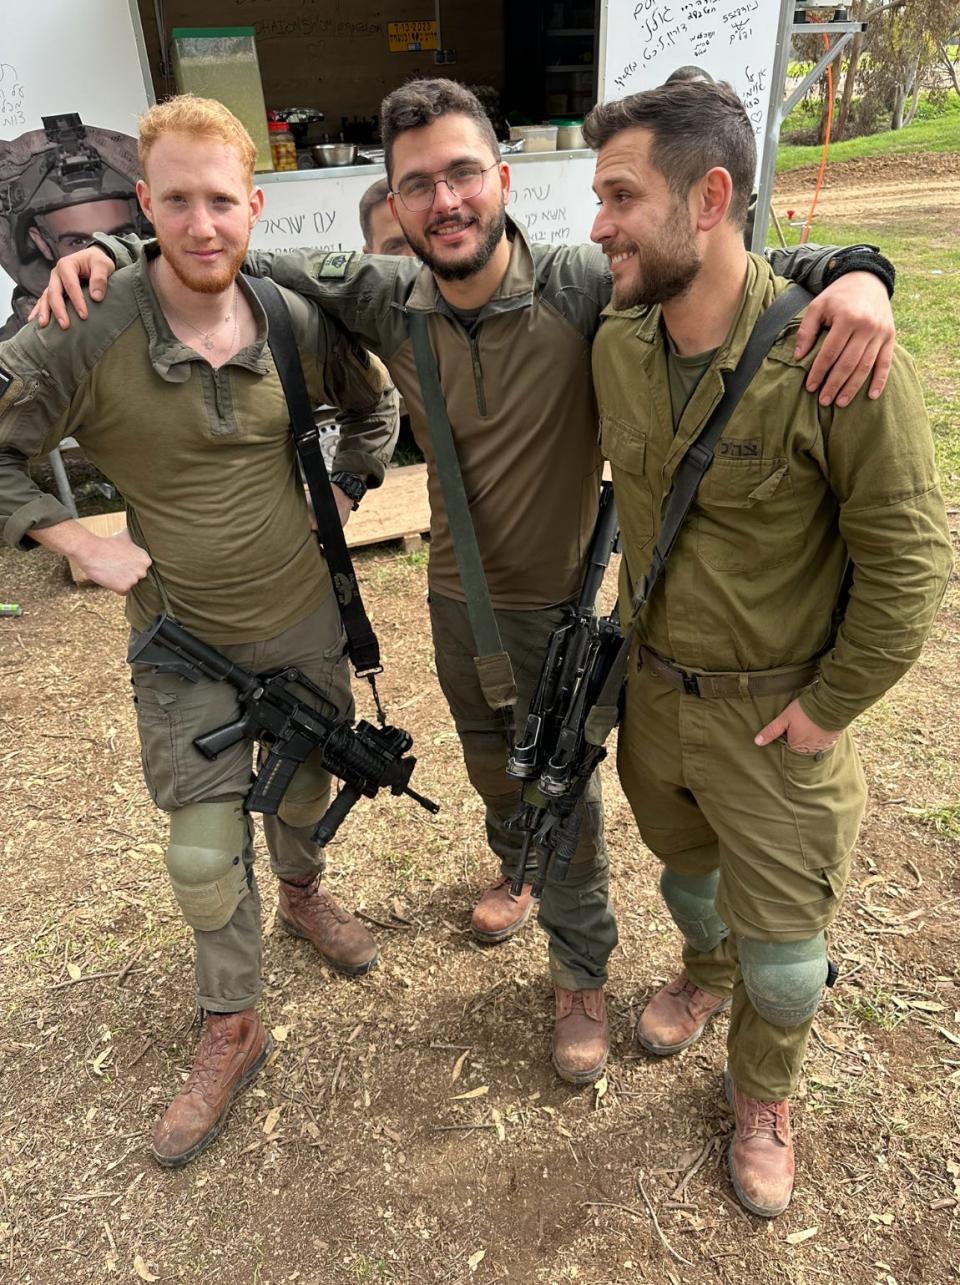 Israeli soldiers Ofek Kirpi, Yonatan Sela Havazelet and Charlie Lanin on brief leave from nearby Gaza. “This,” says Charlie, “is where I’m supposed to be."